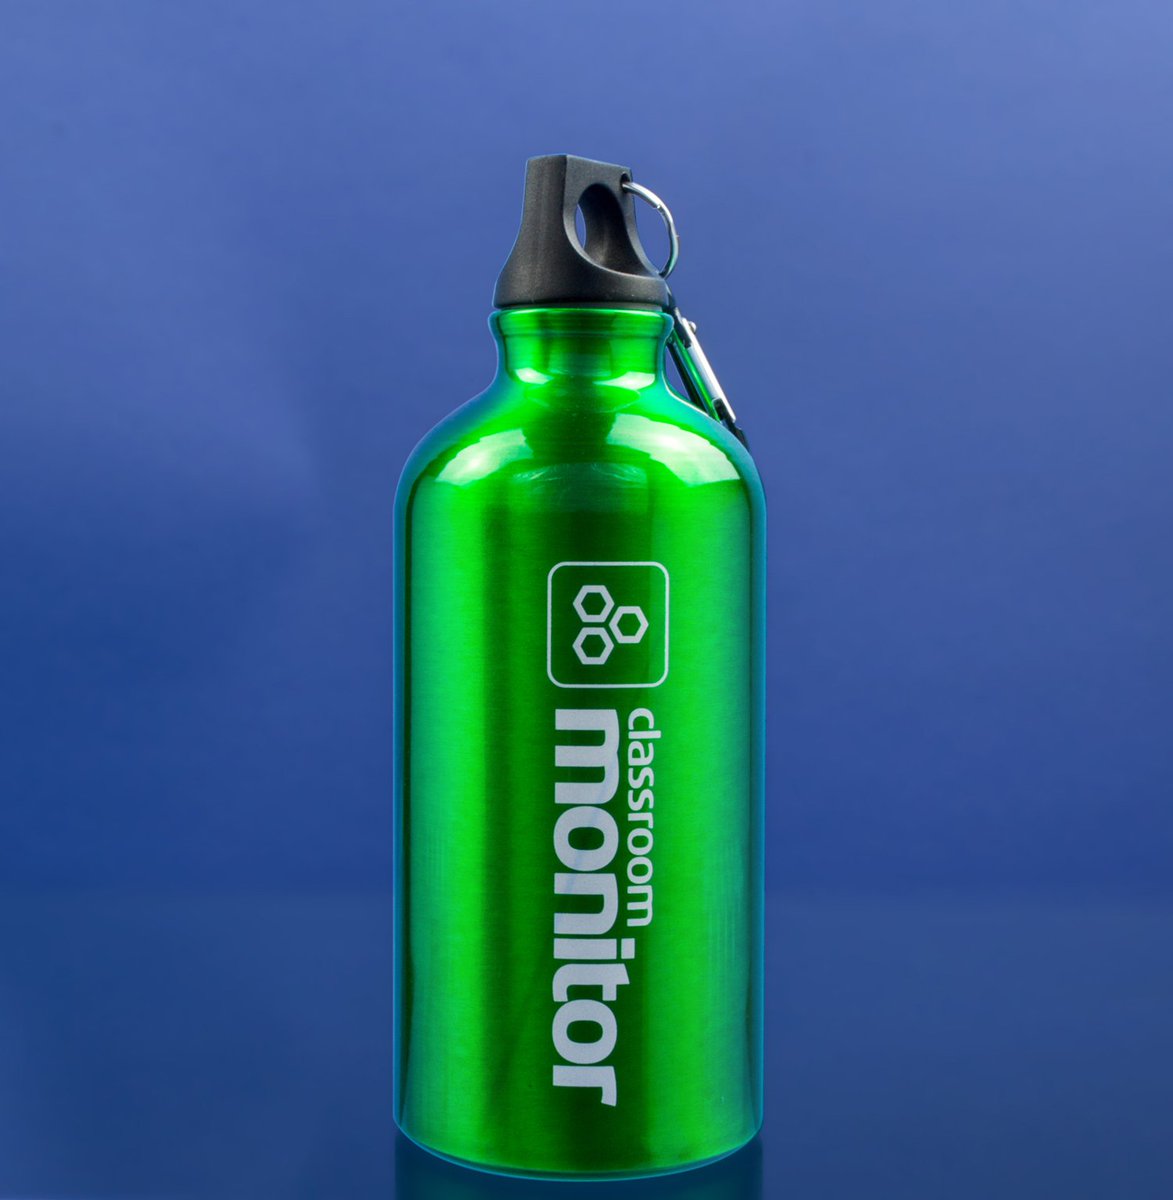 Have your logo etched into our aluminium drinking bottles - contact us on 0115 961 6060 #personalisedbottles #printedbottles #etchedbottles